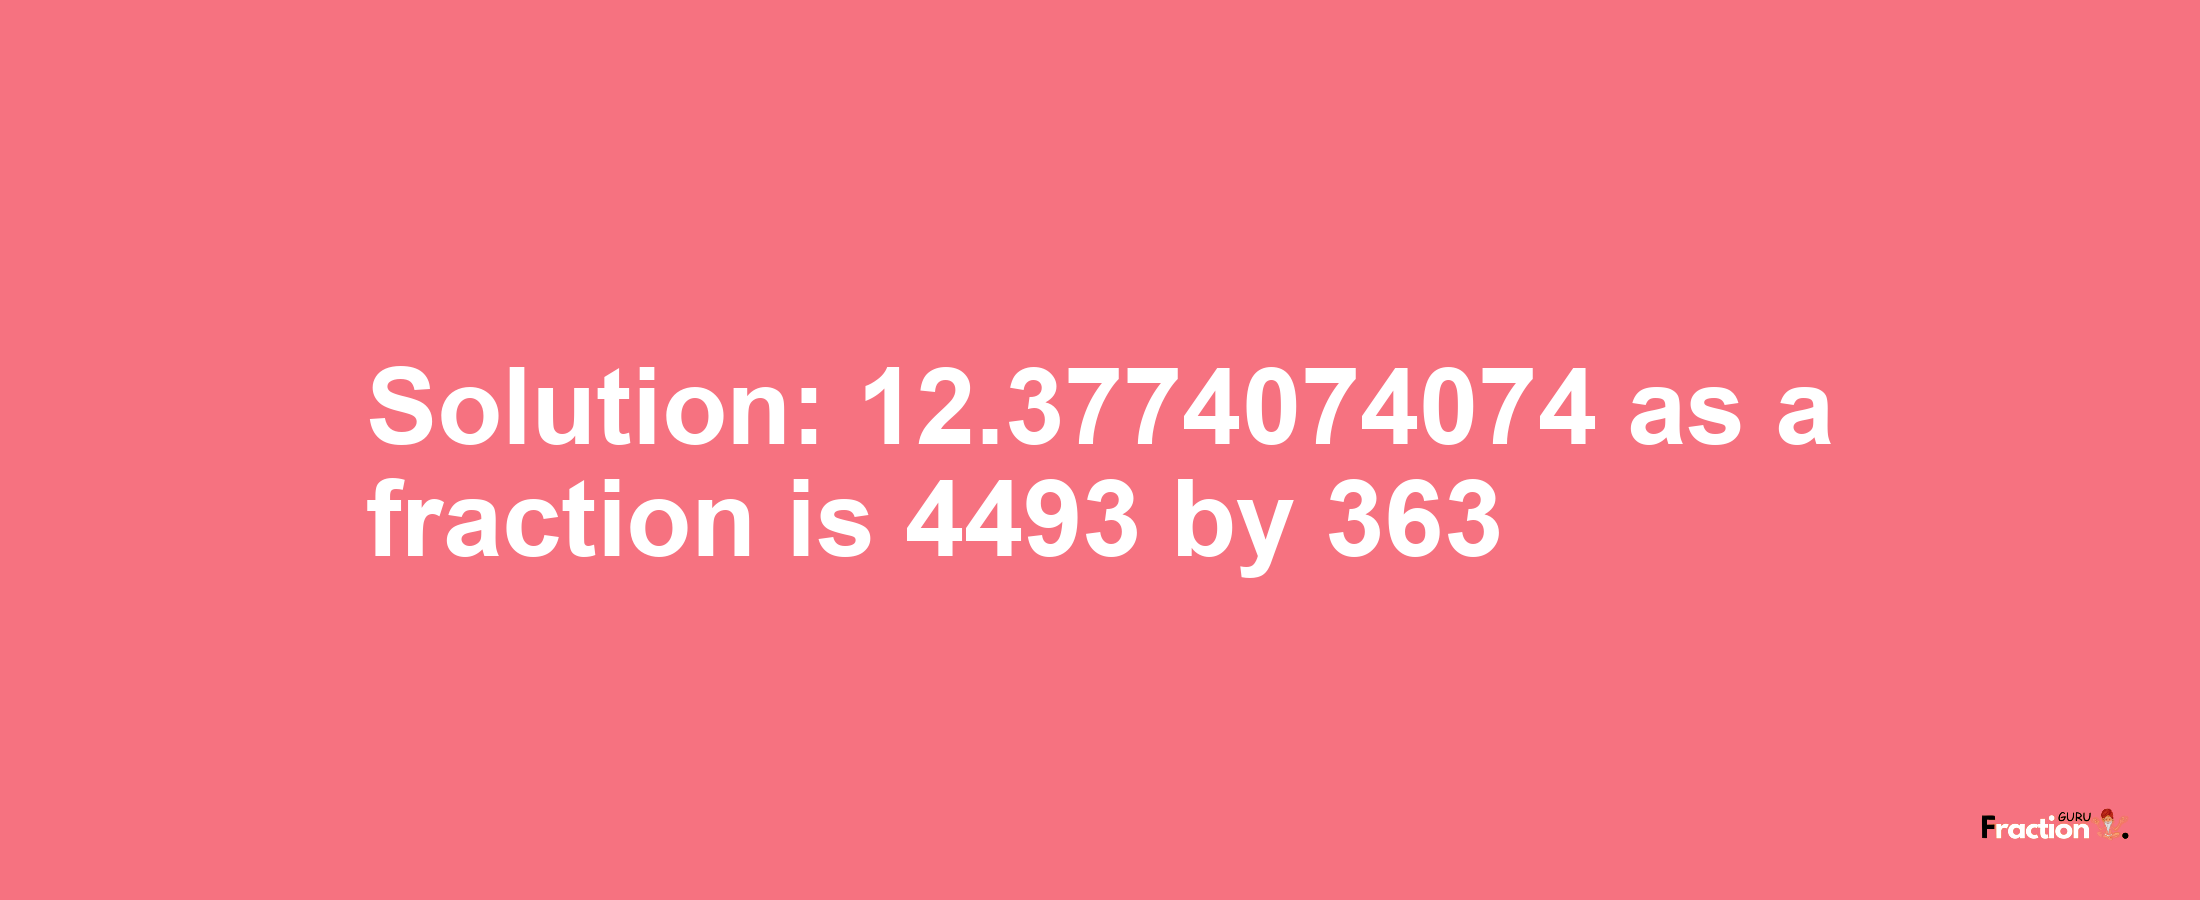 Solution:12.3774074074 as a fraction is 4493/363